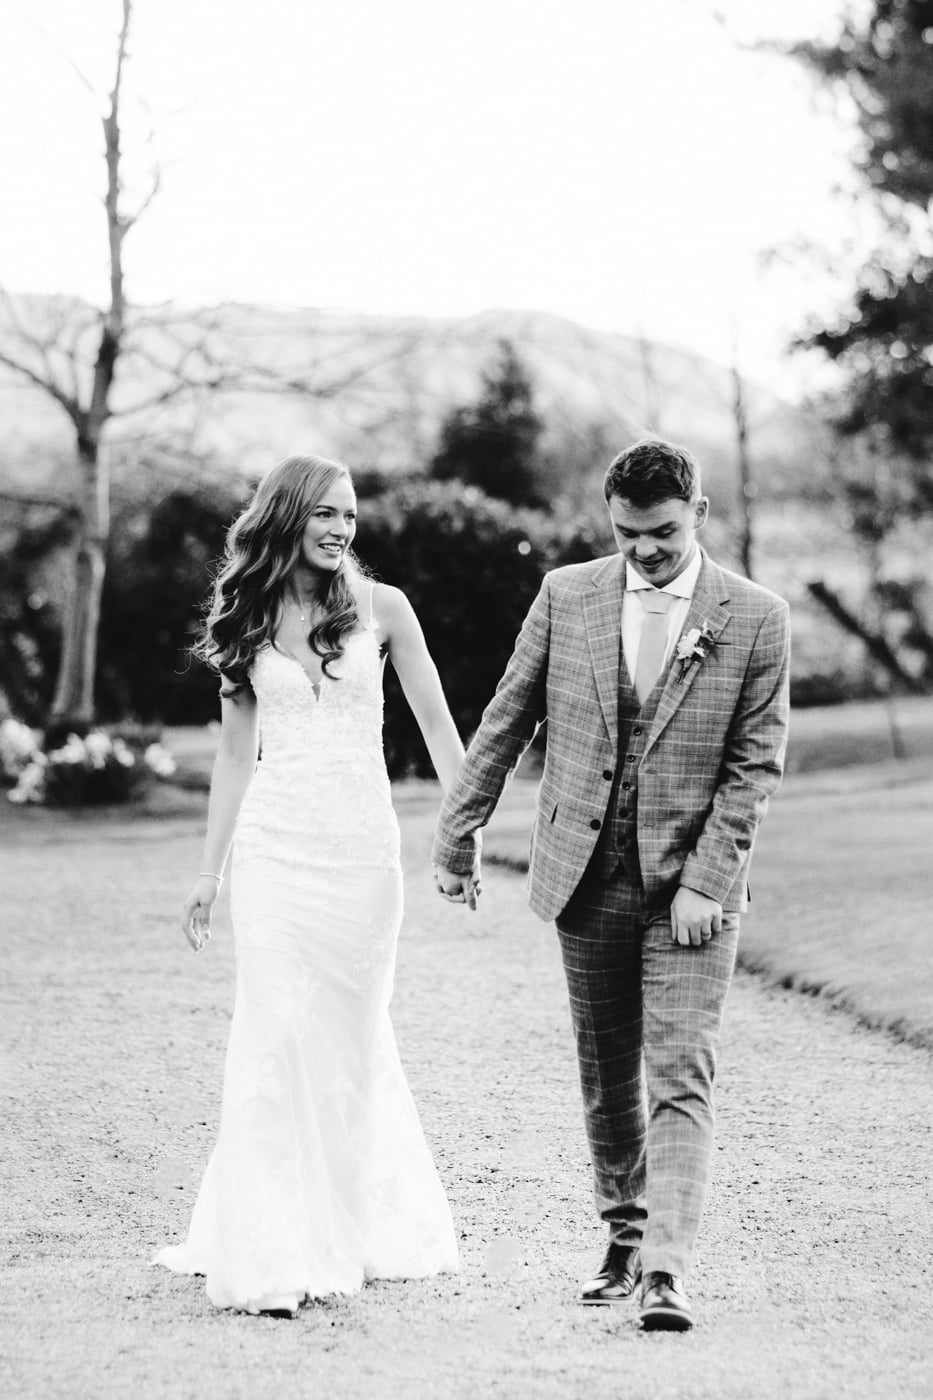 Lauren and patrick walking through the grounds of eaves hall in cheshire.